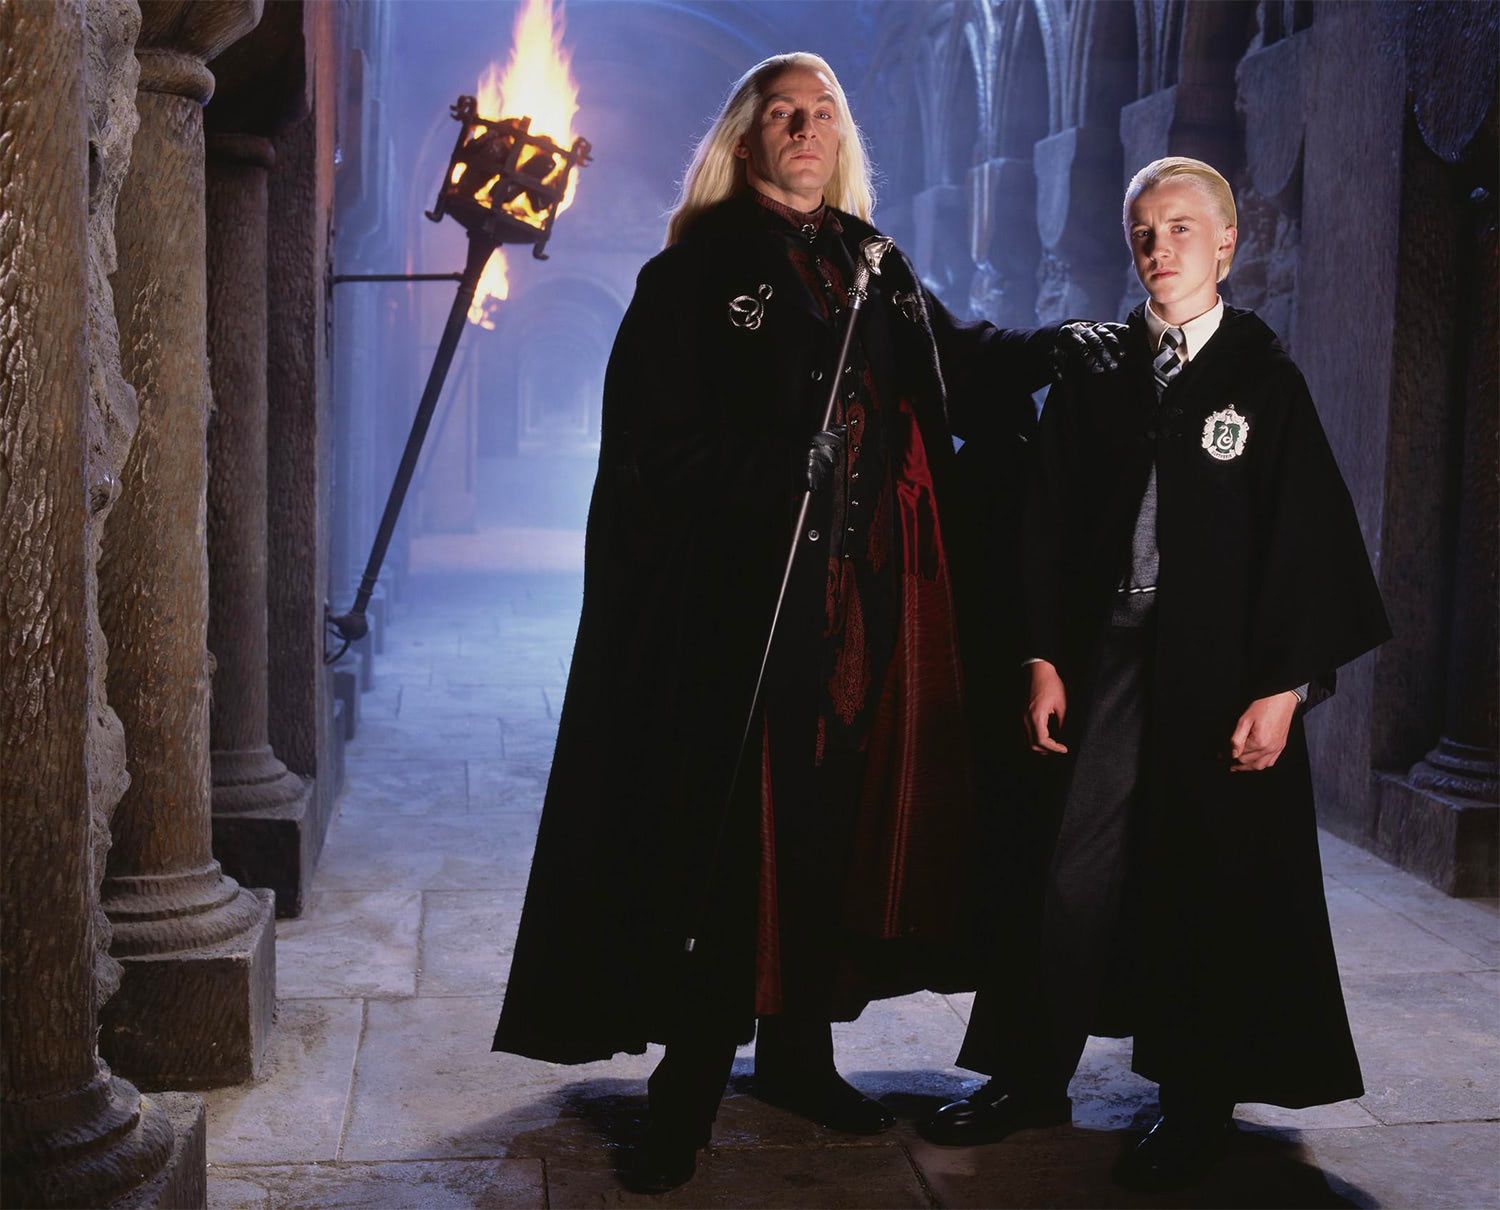 Lucius (left) and Draco Malfoy (right) are in a Hogwarts hallway.